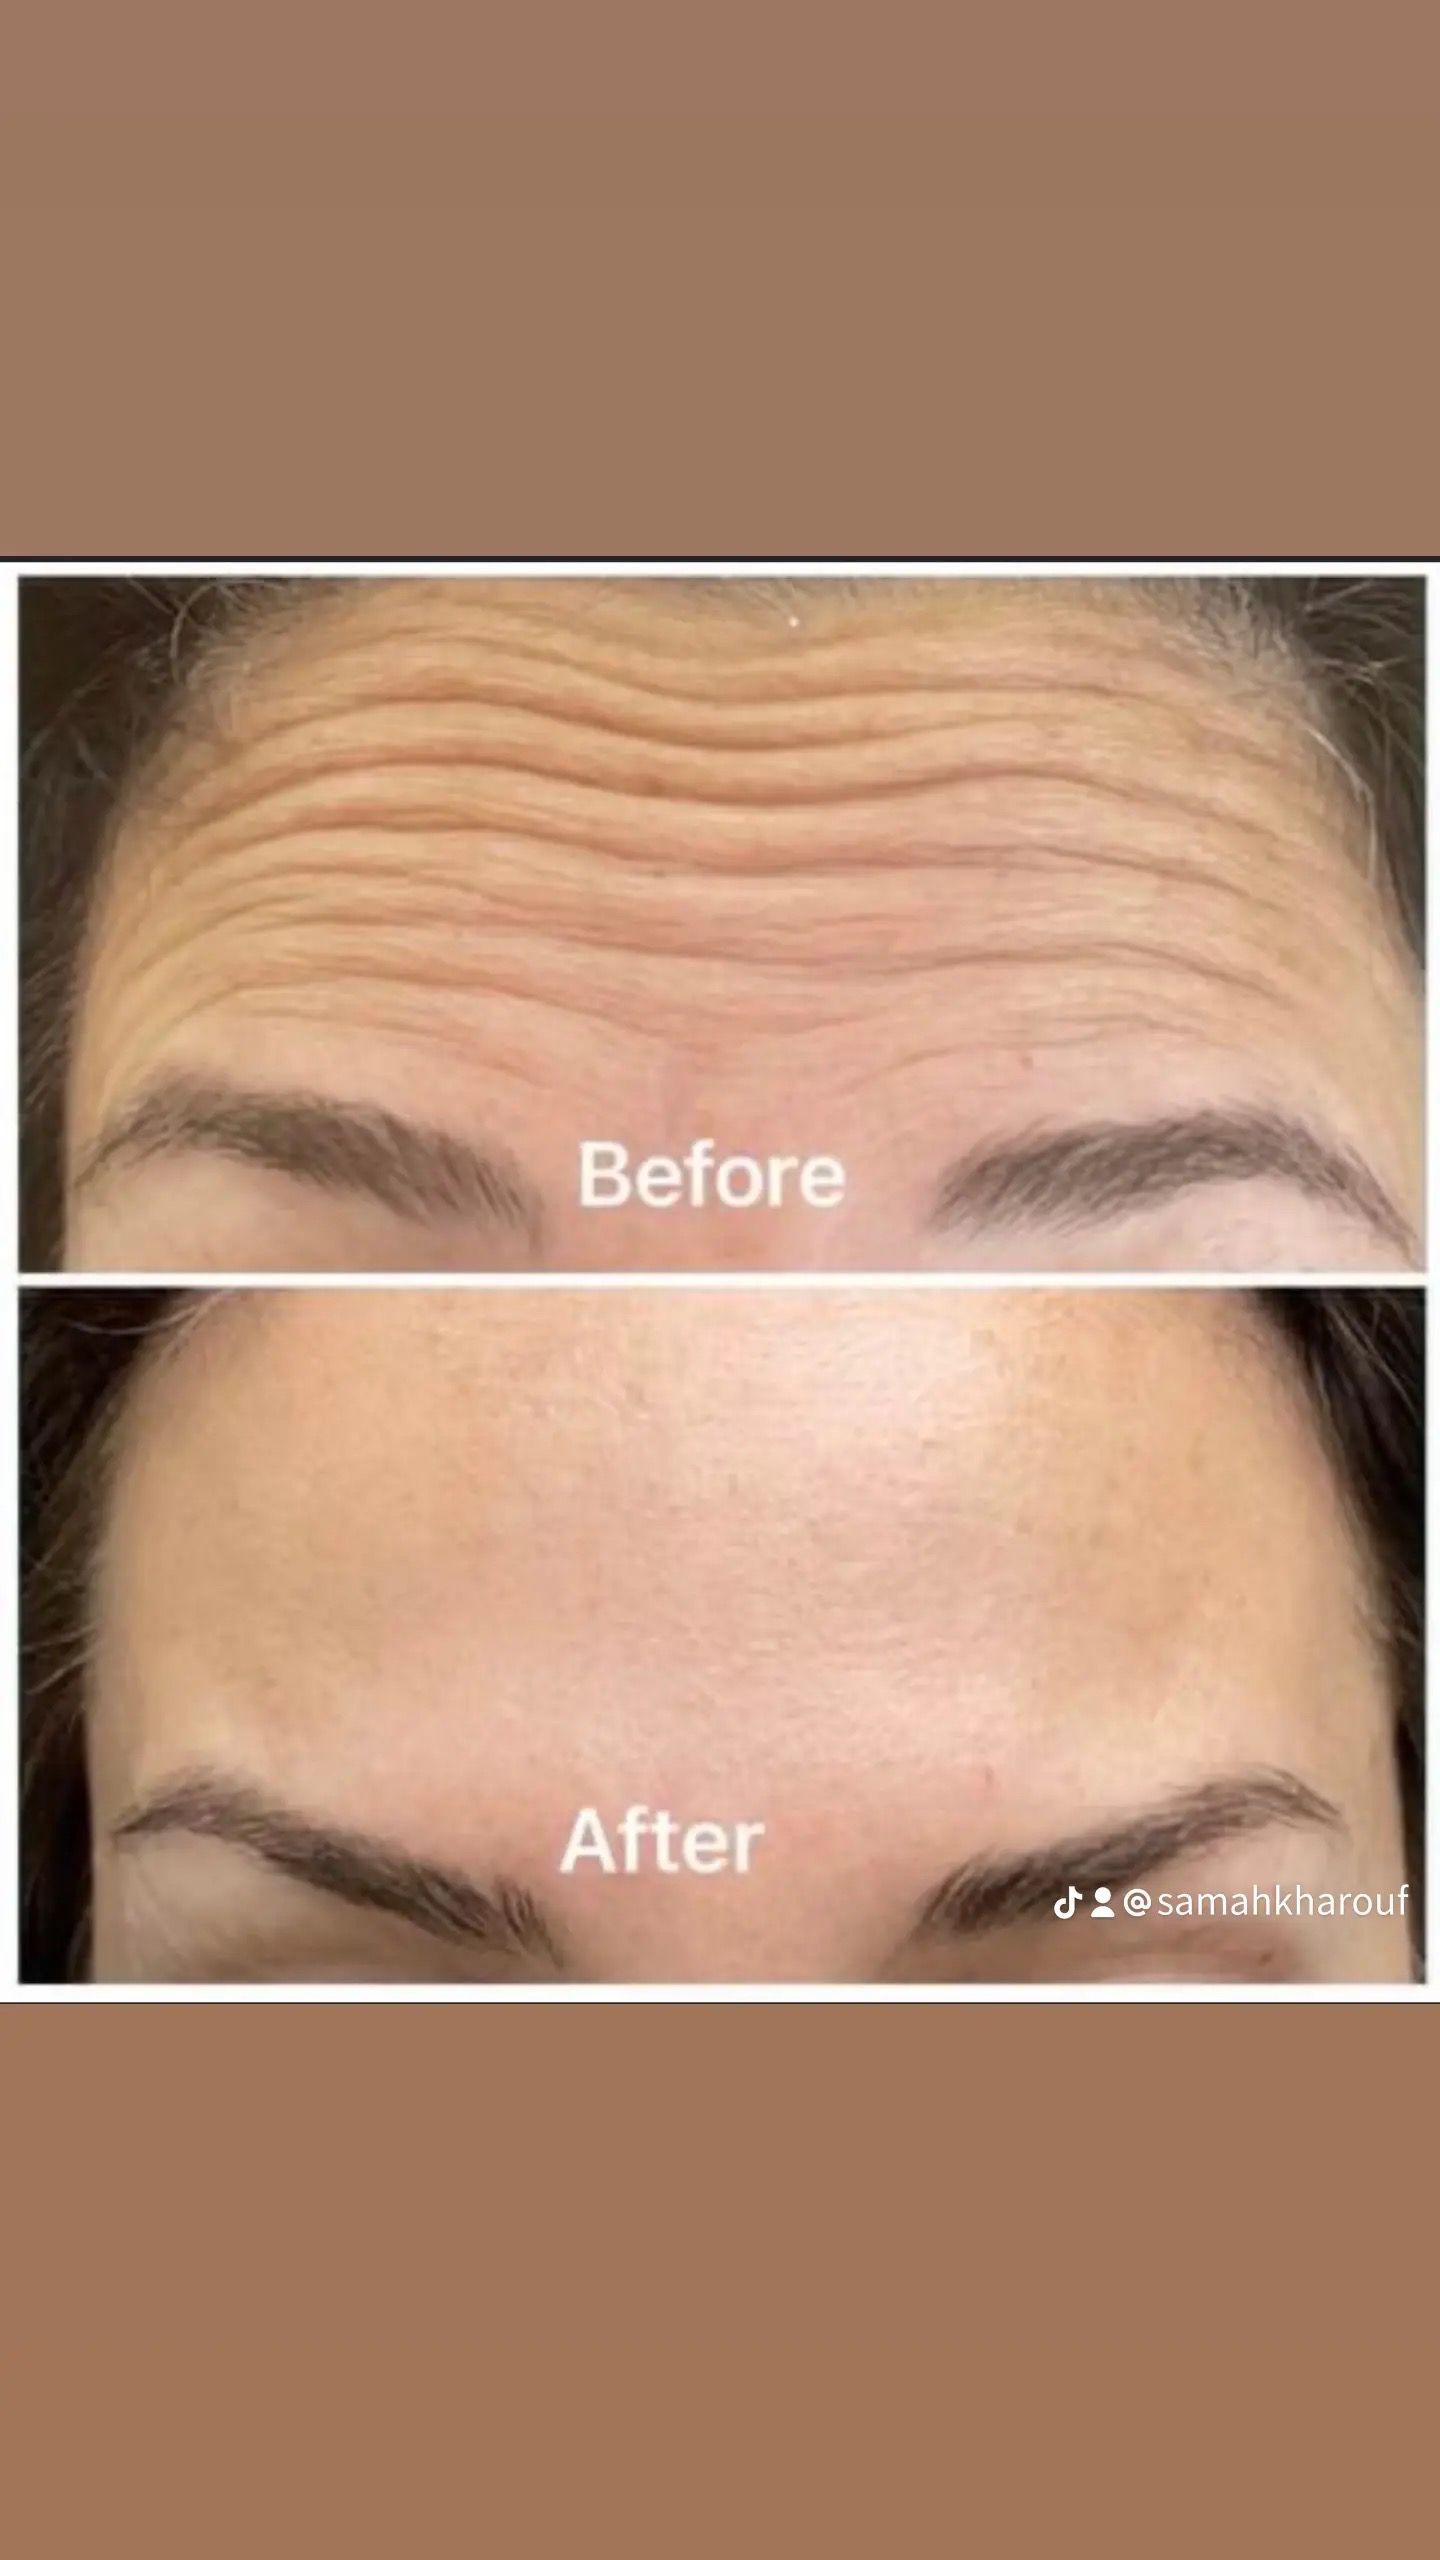 A before and after picture of a woman 's forehead with wrinkles.